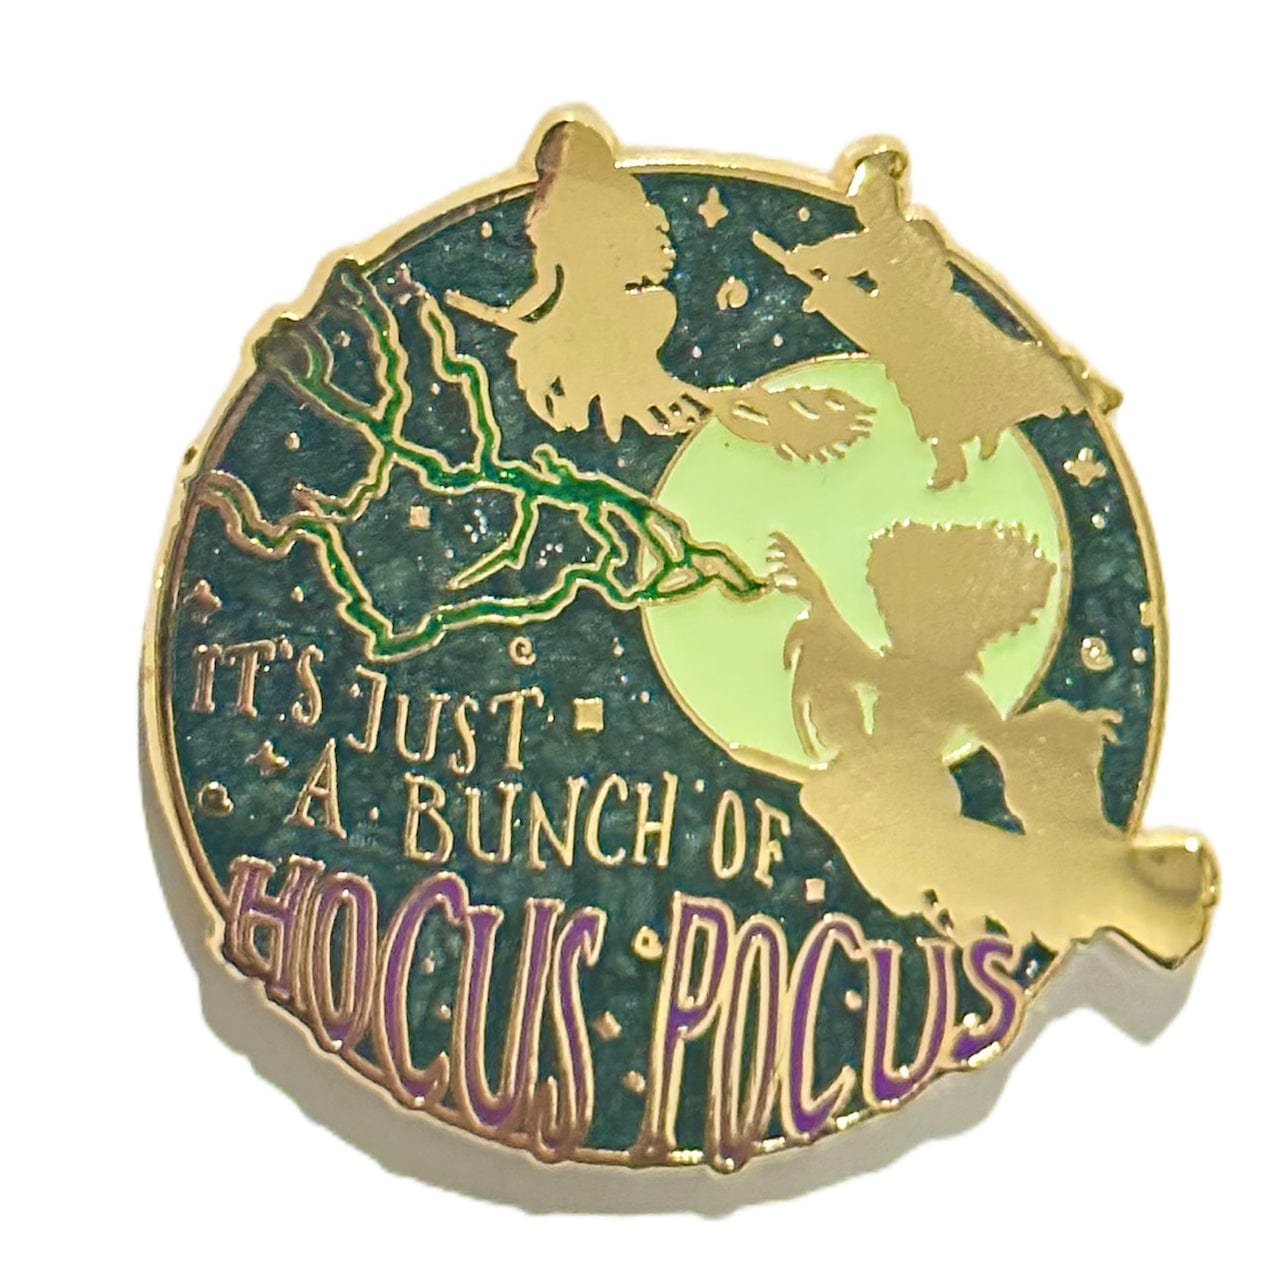 Pinbuds Enamel pin Salem witches pin featuring quote "It's just a little Hocus Pocus" ( glowing & pearl) limited edition